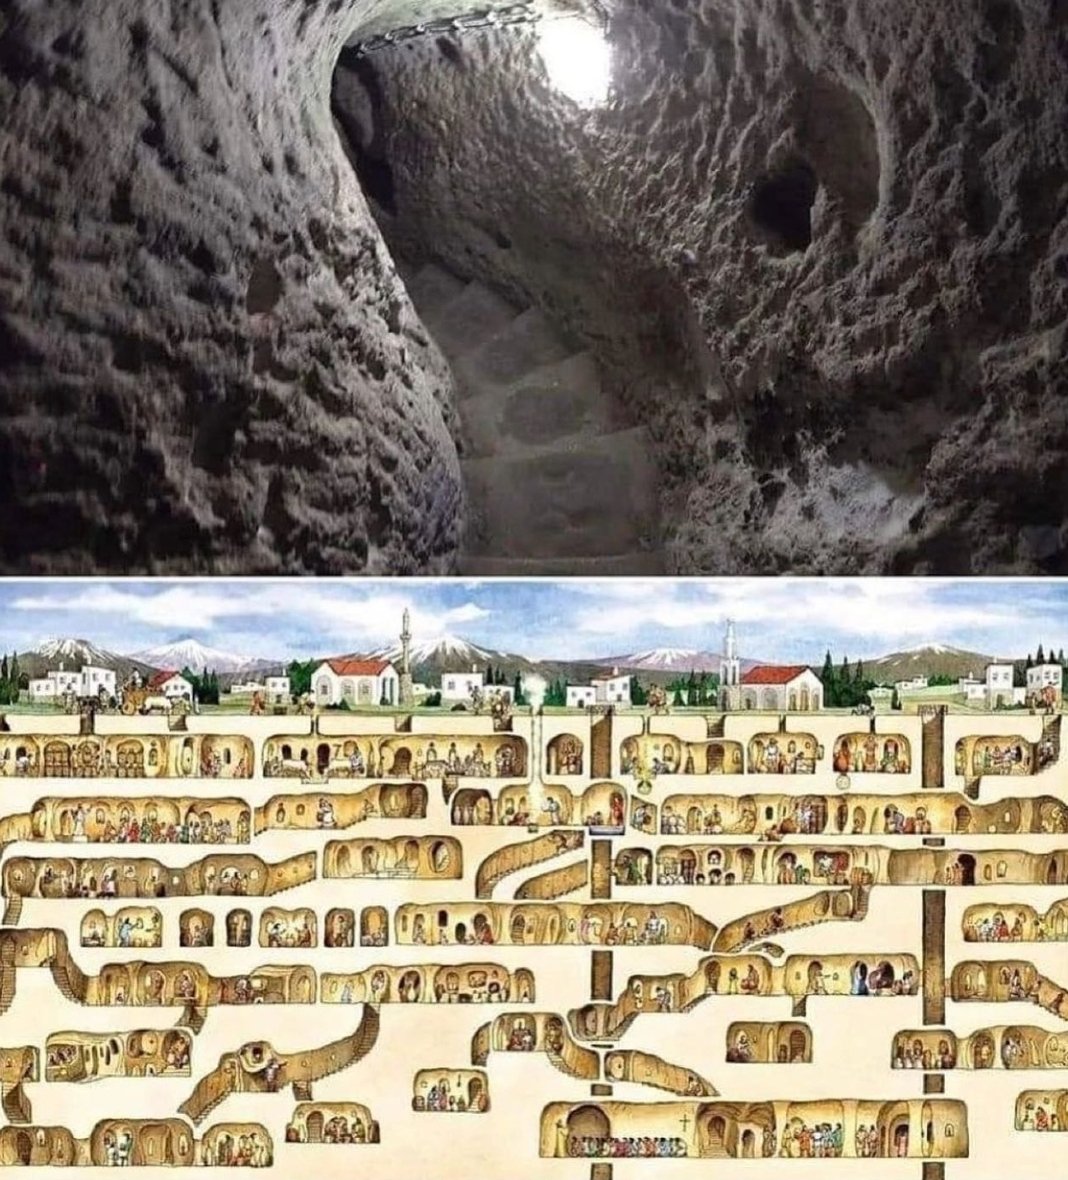 Derinkuyu, a mysterious underground city in Turkey, found in man's basement.

In 1963, the basement renovation project led to the archaeological discovery of a lifetime. The subterranean city is up to 18 stories and 280 feet deep in places and
probably thousands of years old.